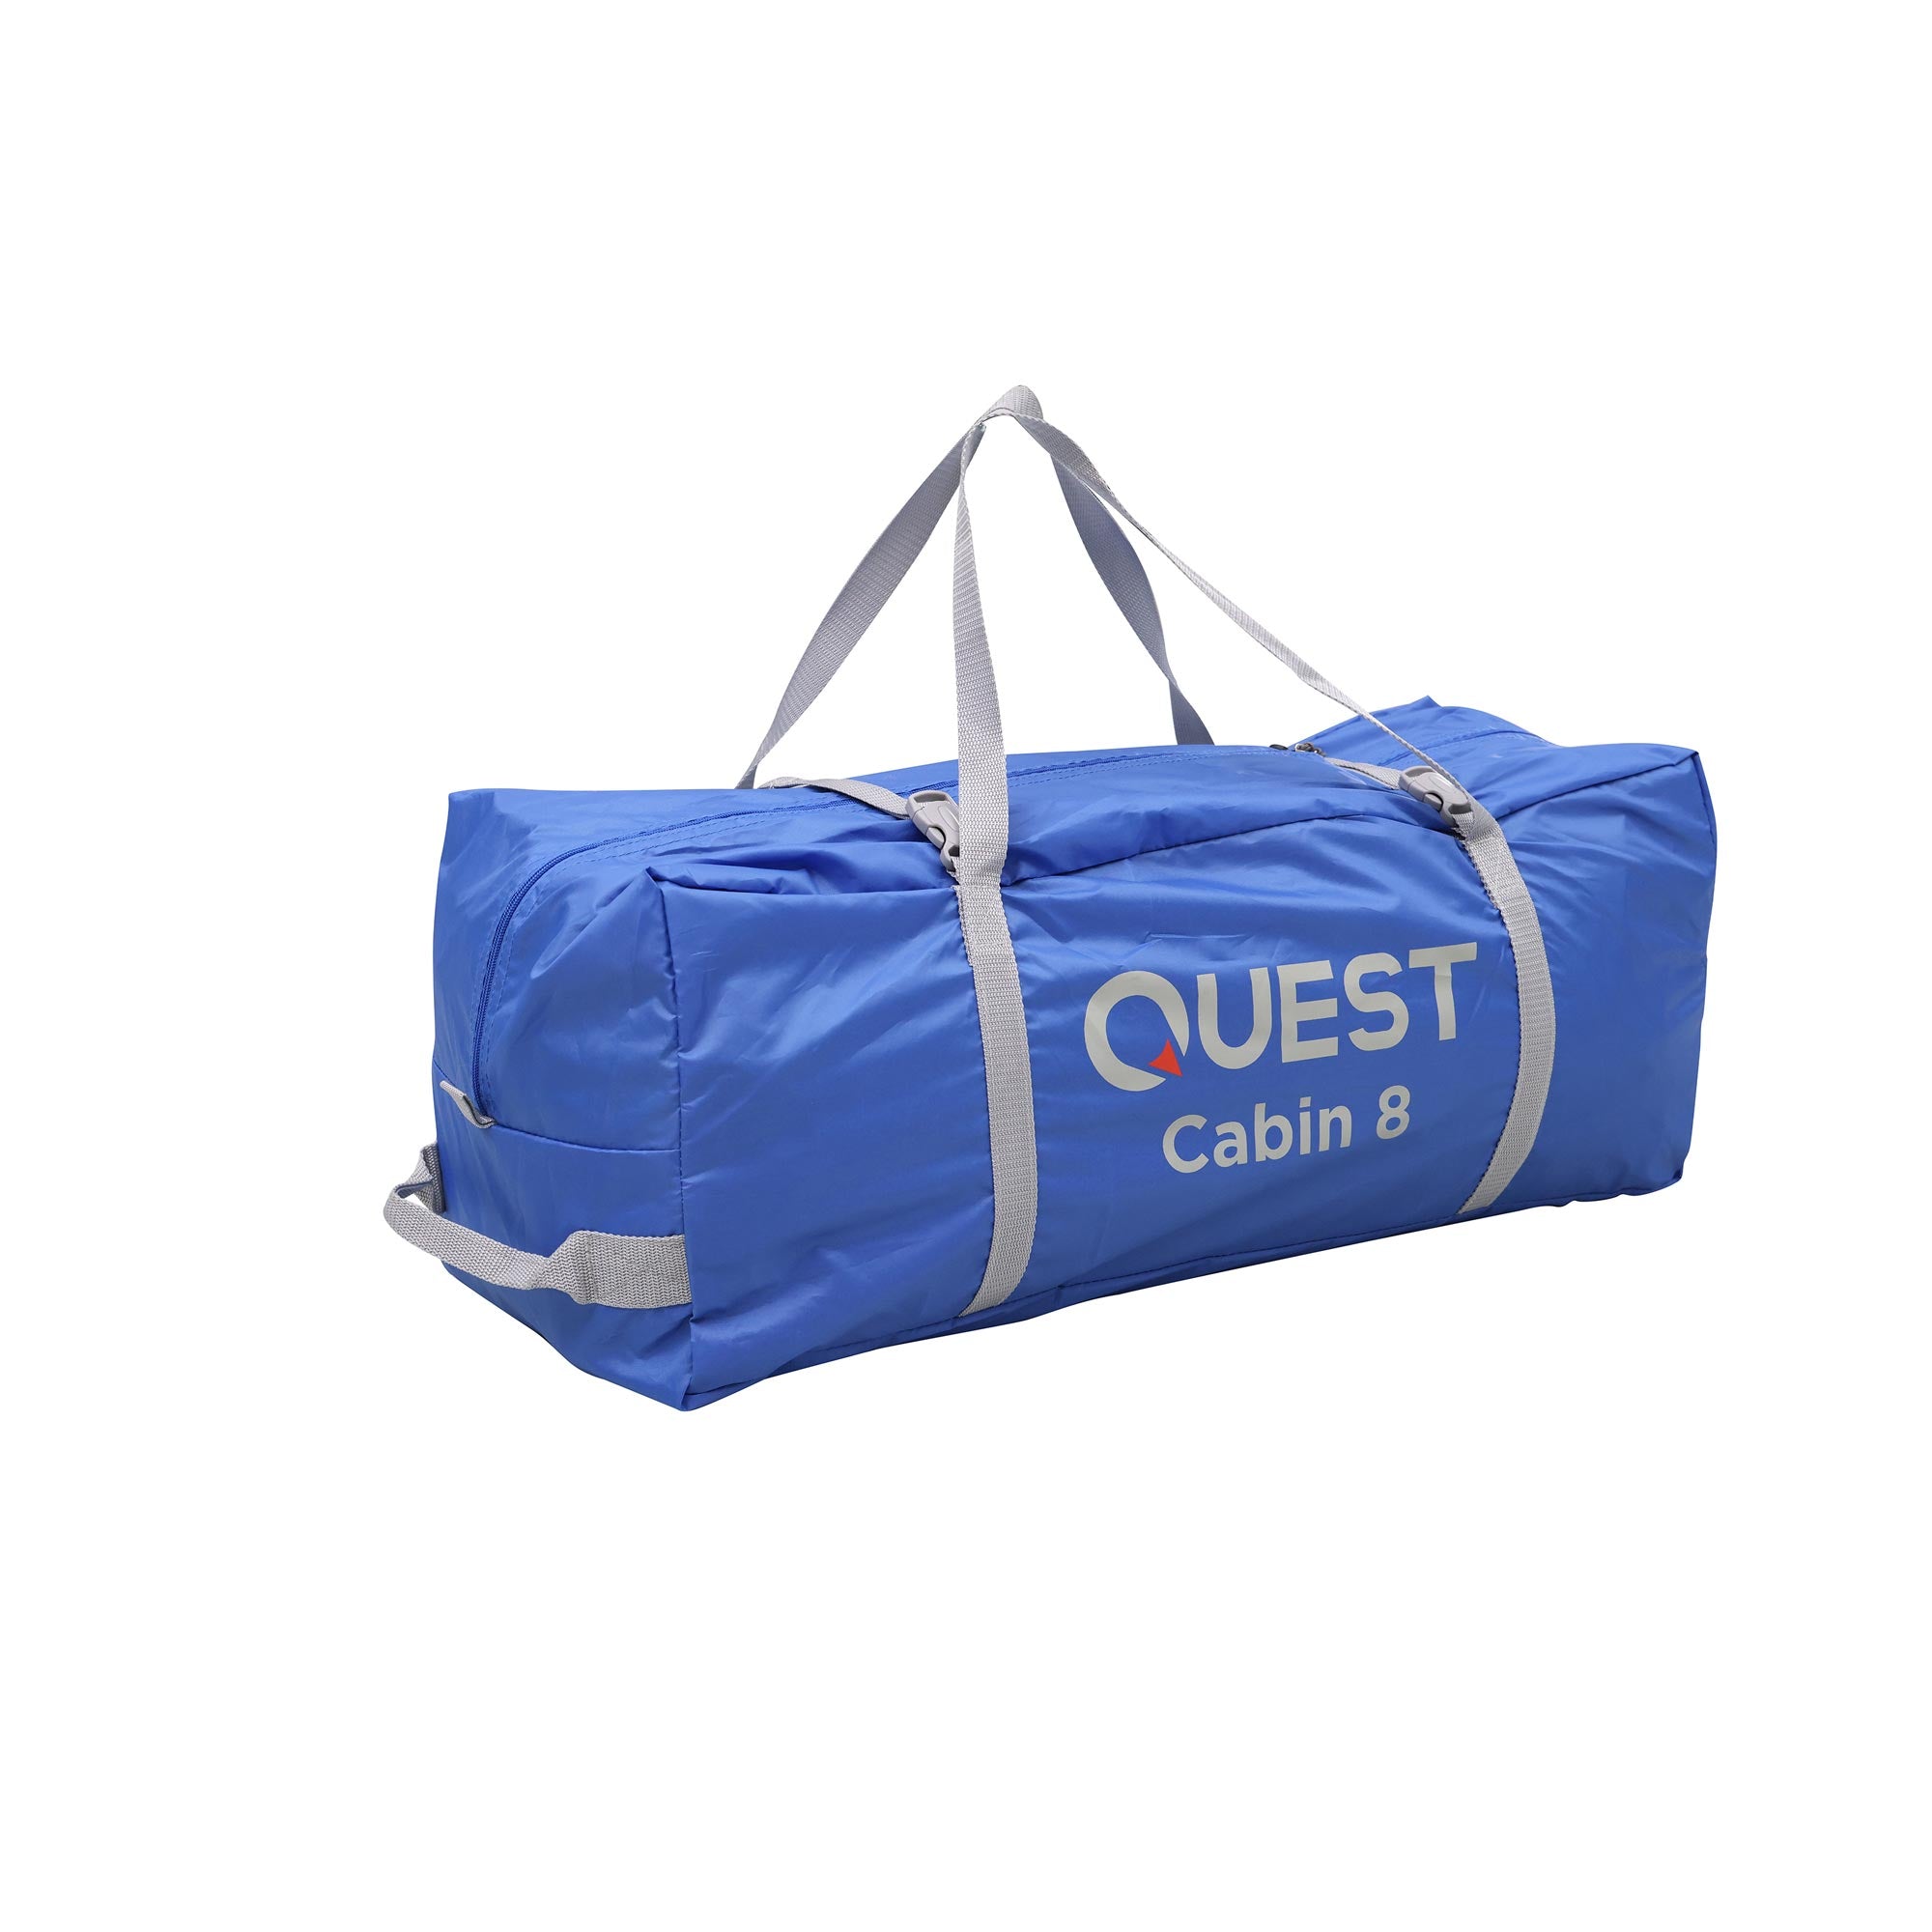 Quest Straight Wall 2 Room Cabin Tent - 8 Person